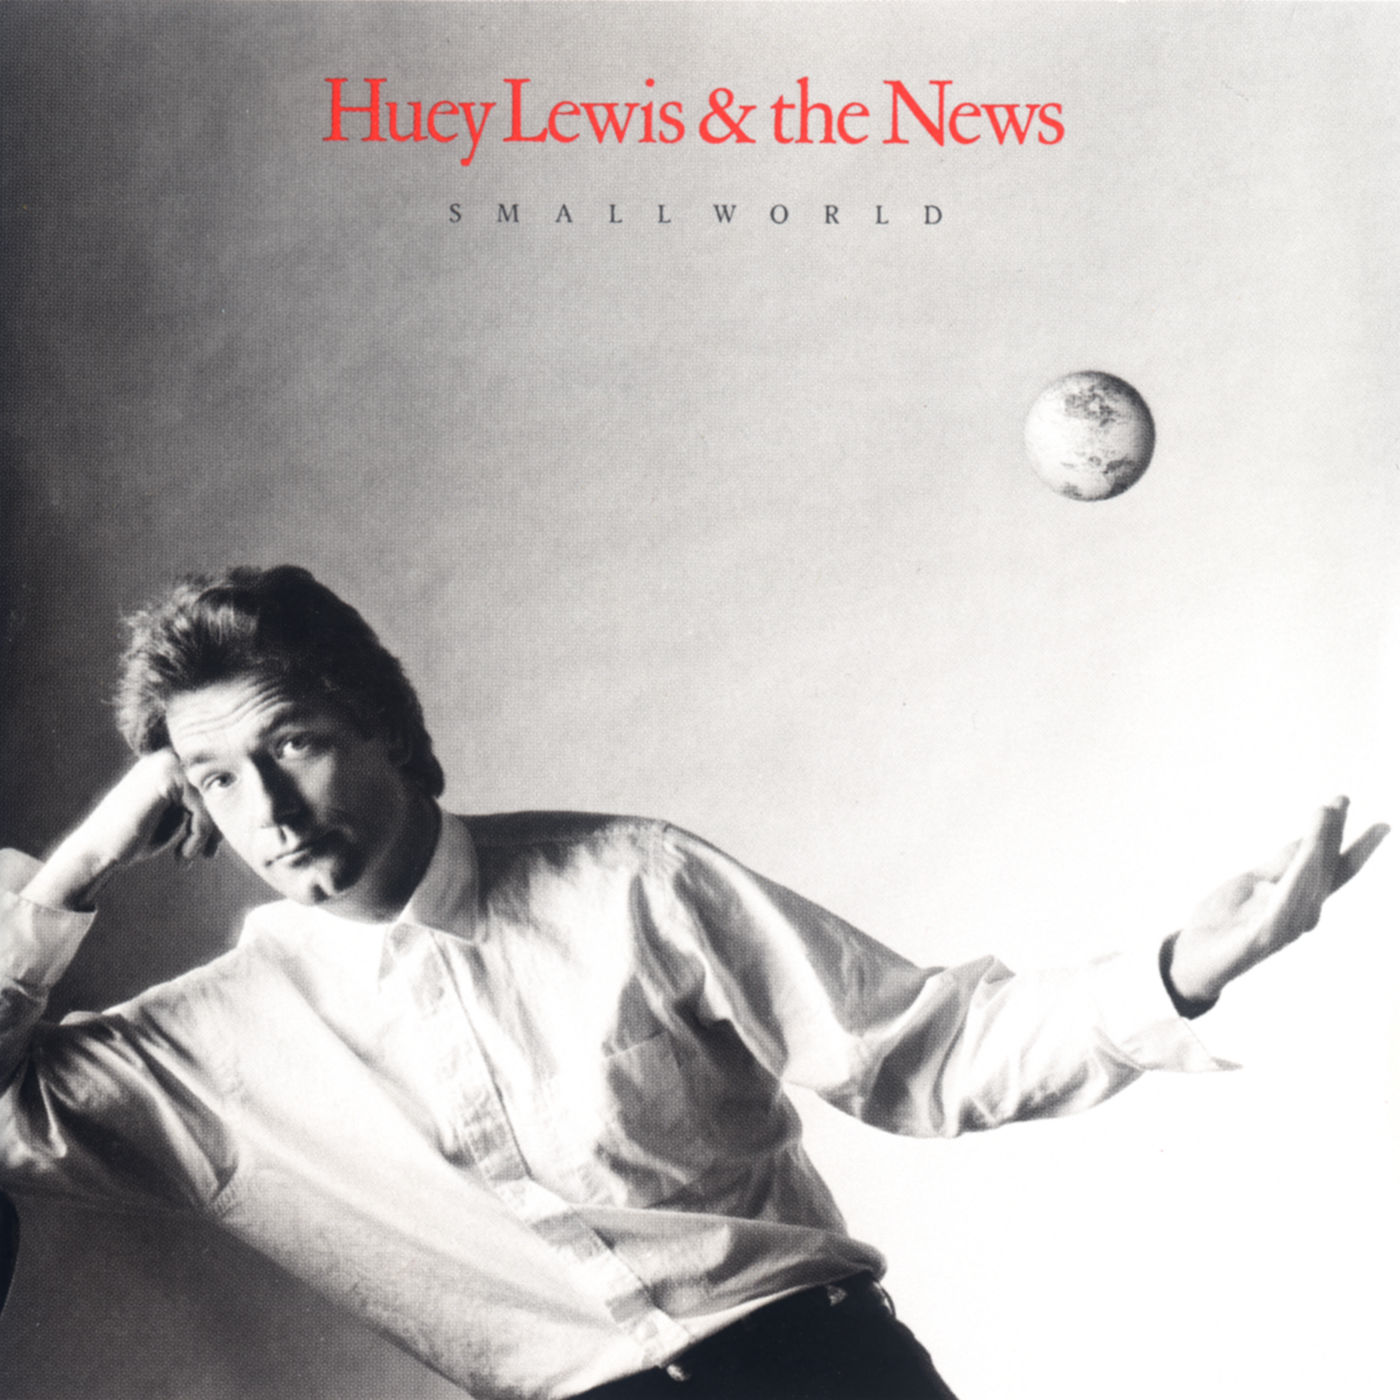 Huey Lewis And The News - Small World (1988/2021) [FLAC 24bit/192kHz]